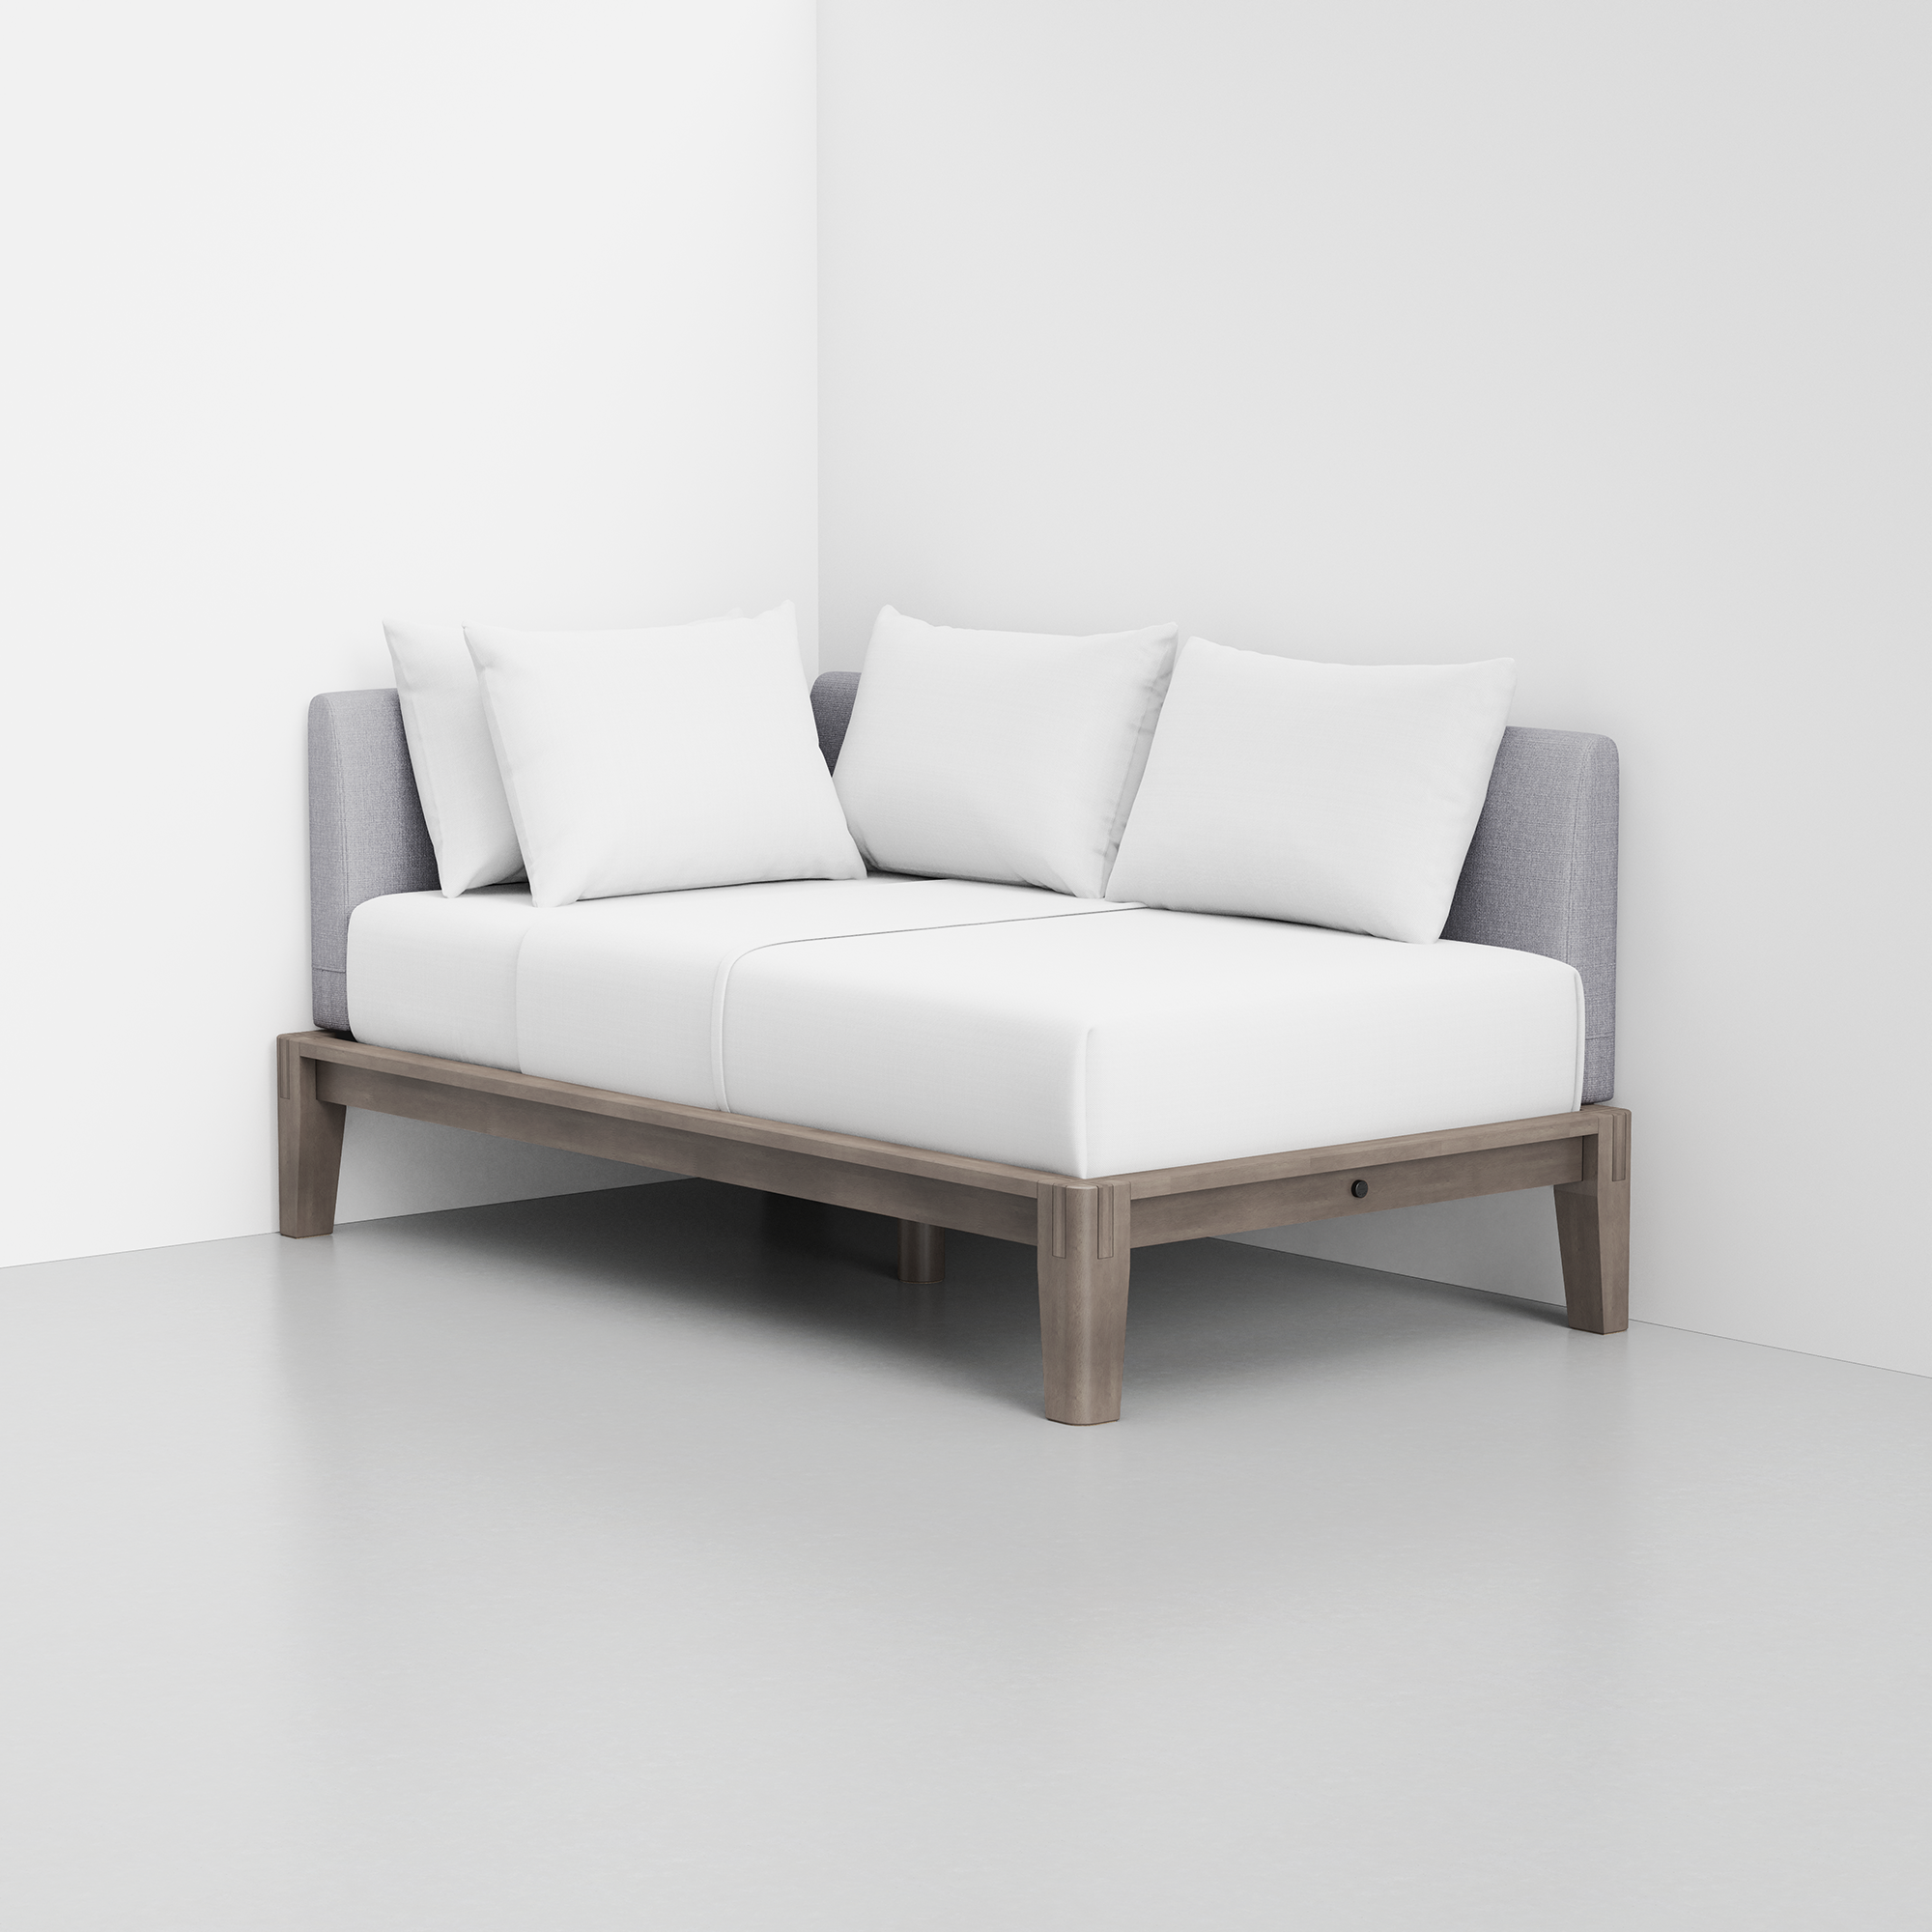 PDP Image: The Daybed (Grey / Fog Grey) - Rendering - Pillows